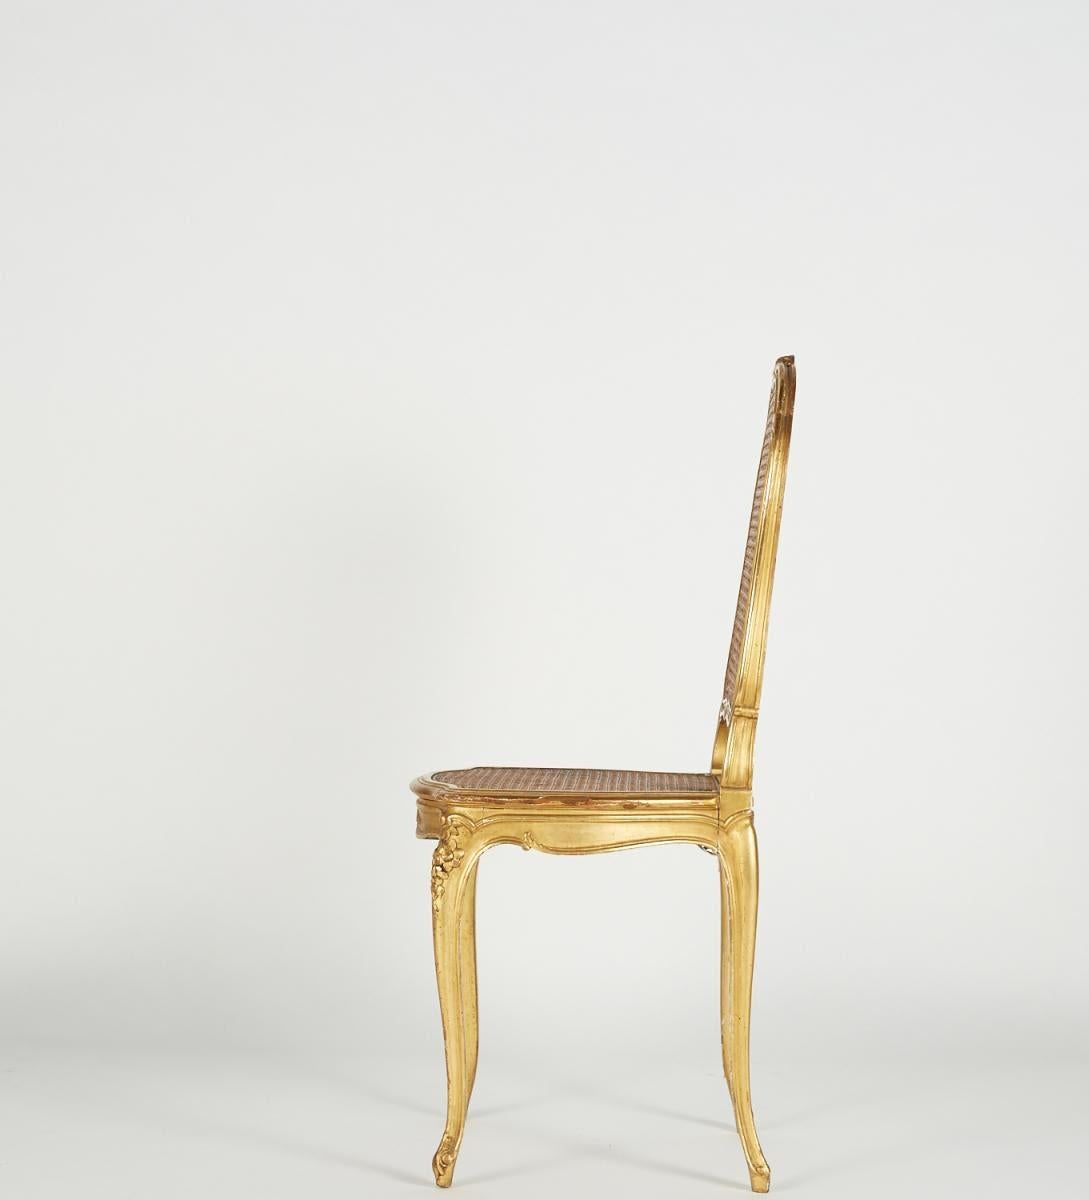 Louis XV style giltwood chair, 19th century.

Louis XV style chair in carved and gilded wood, cane seat and back, late 19th century, lack of gilding which can be restored on request.

Dimensions: h: 96cm, w: 42cm, d: 44cm